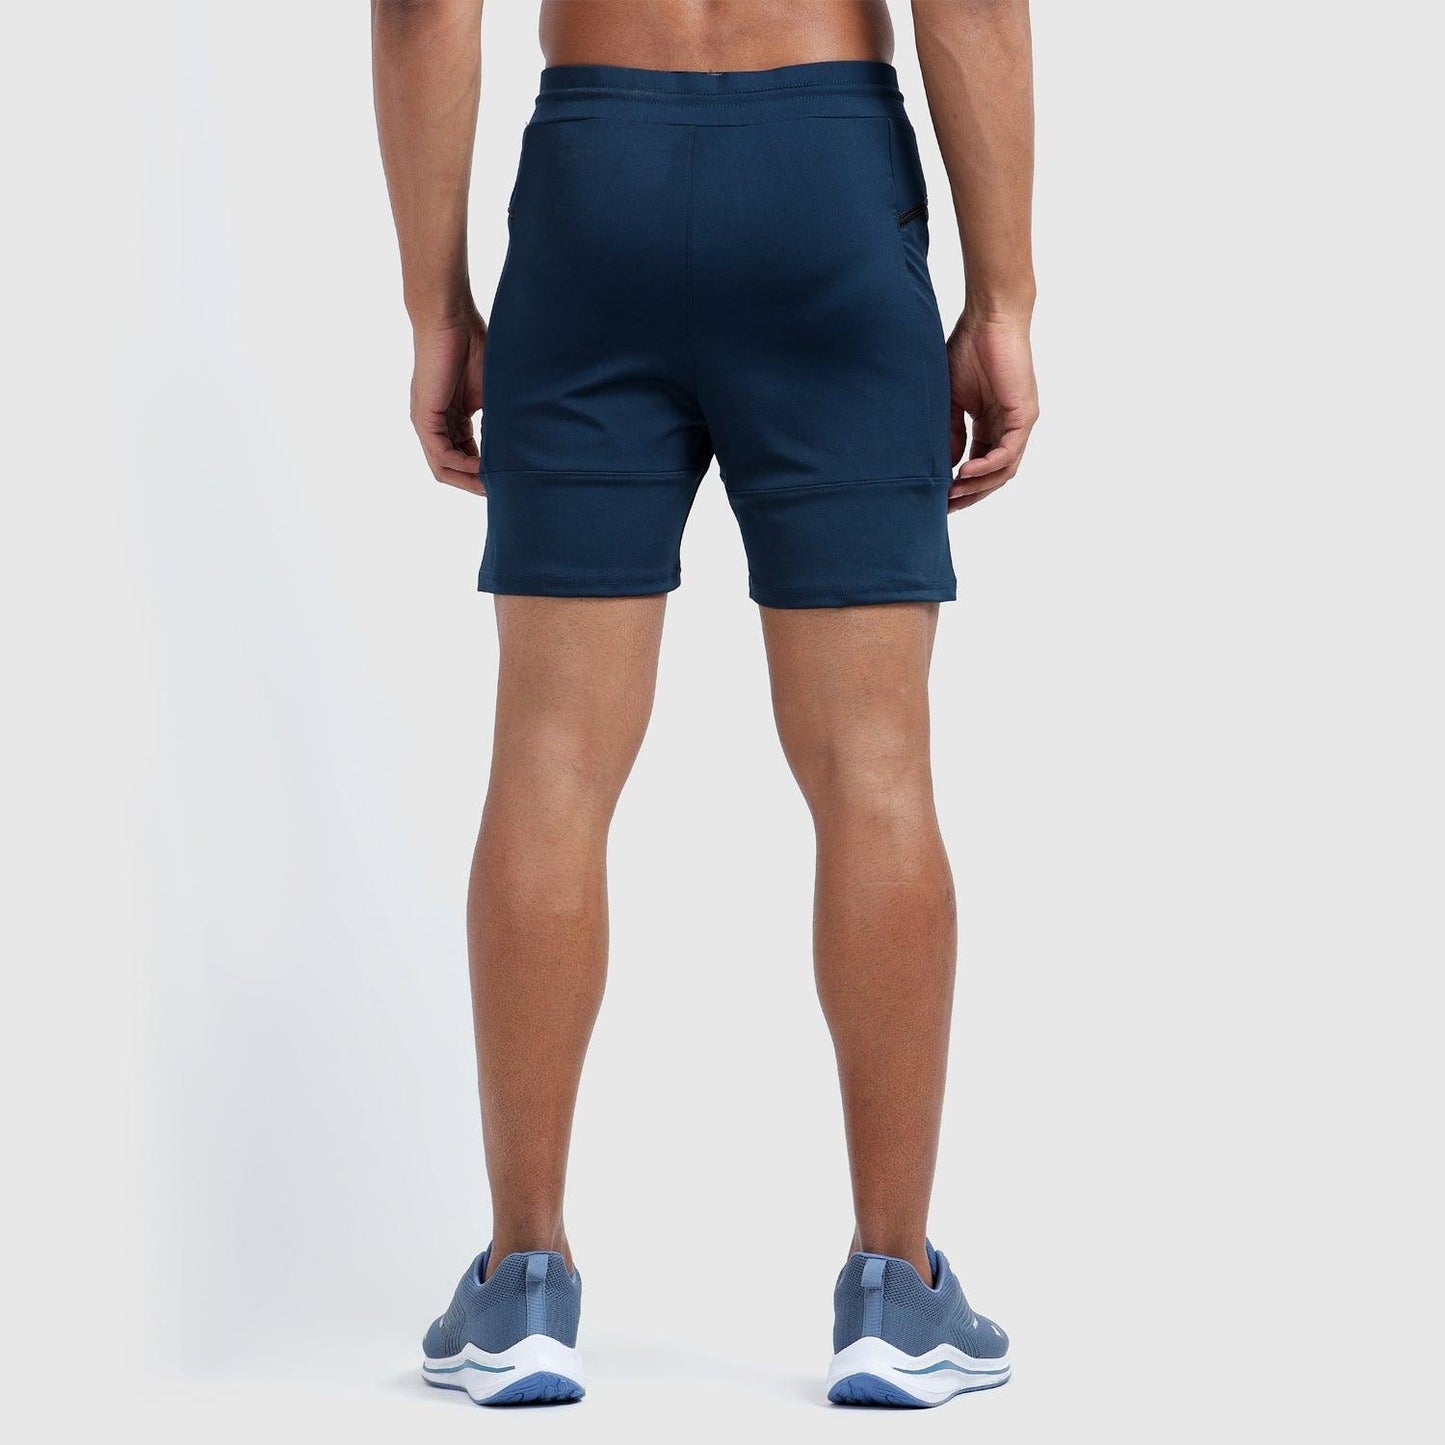 Denmonk's fashionable Power Shorts regal blue shorts for men will boost your level of gym fitness.